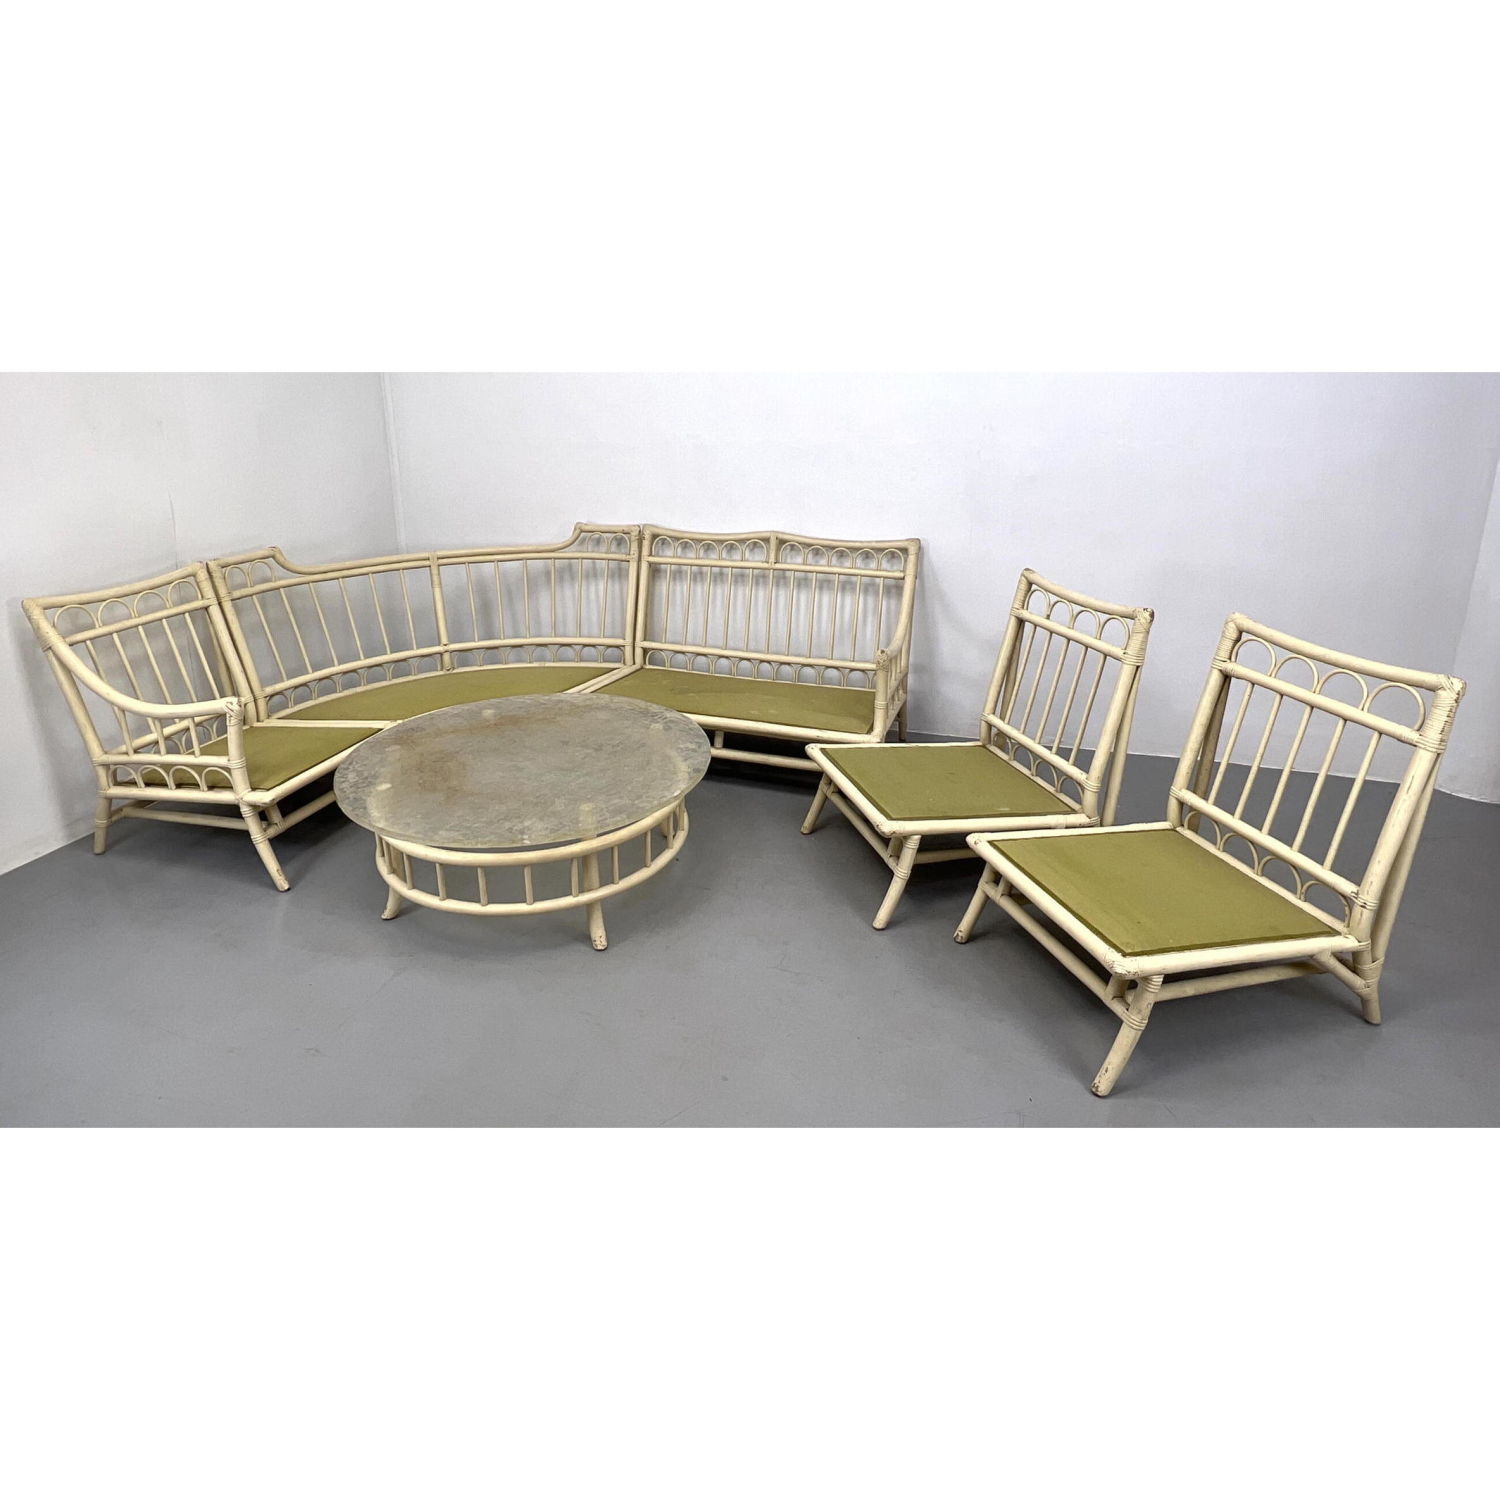 6pc WILLOW REED Painted Rattan 2ff4a6